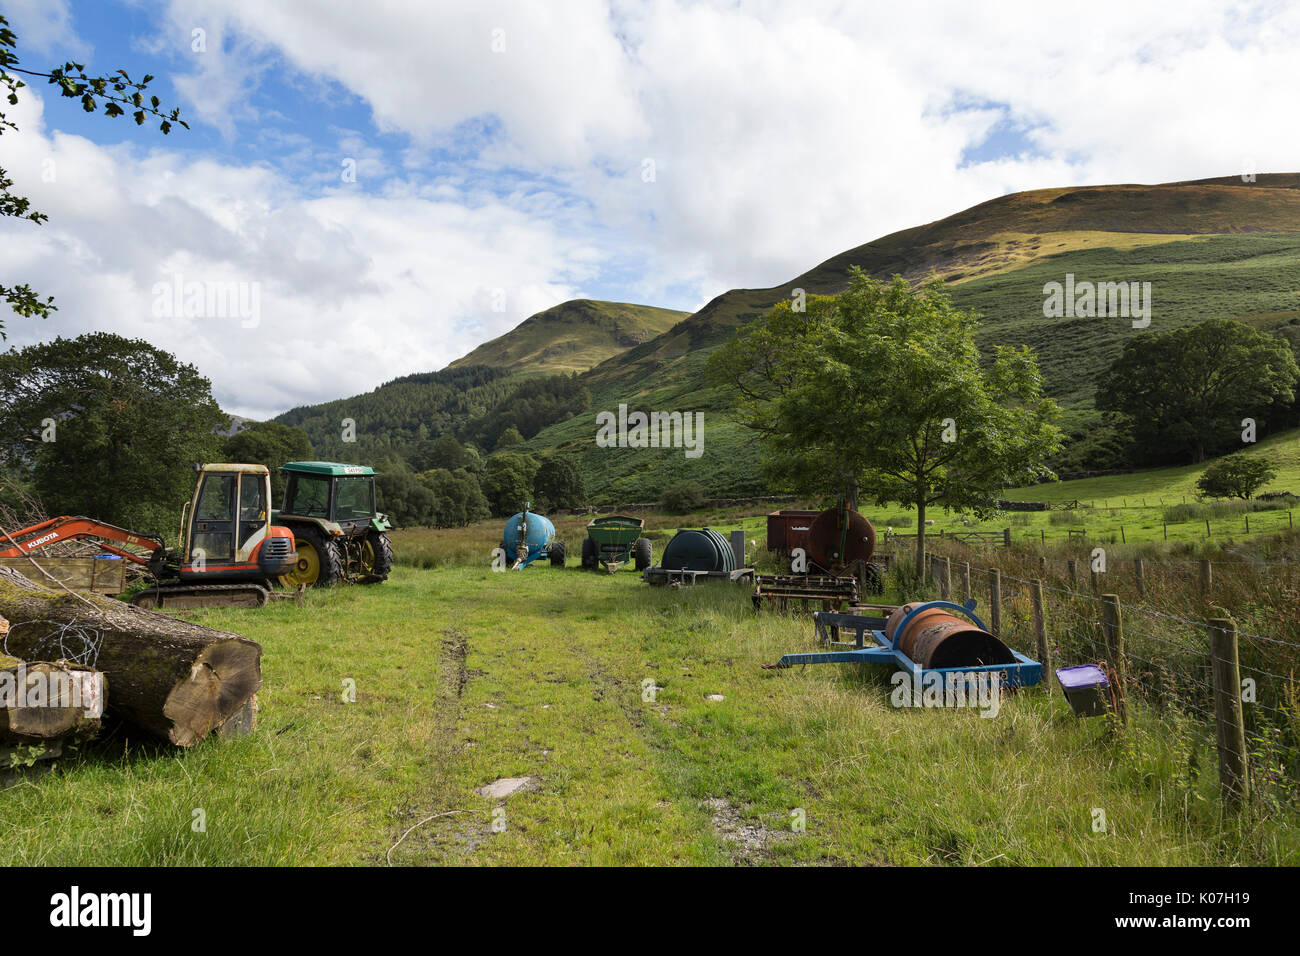 Farm tractors and other equipment at Hudson Place, Loweswater, Lake District, Cumbria, England. Burnbank Fell and Carling Knott are also shown. Stock Photo